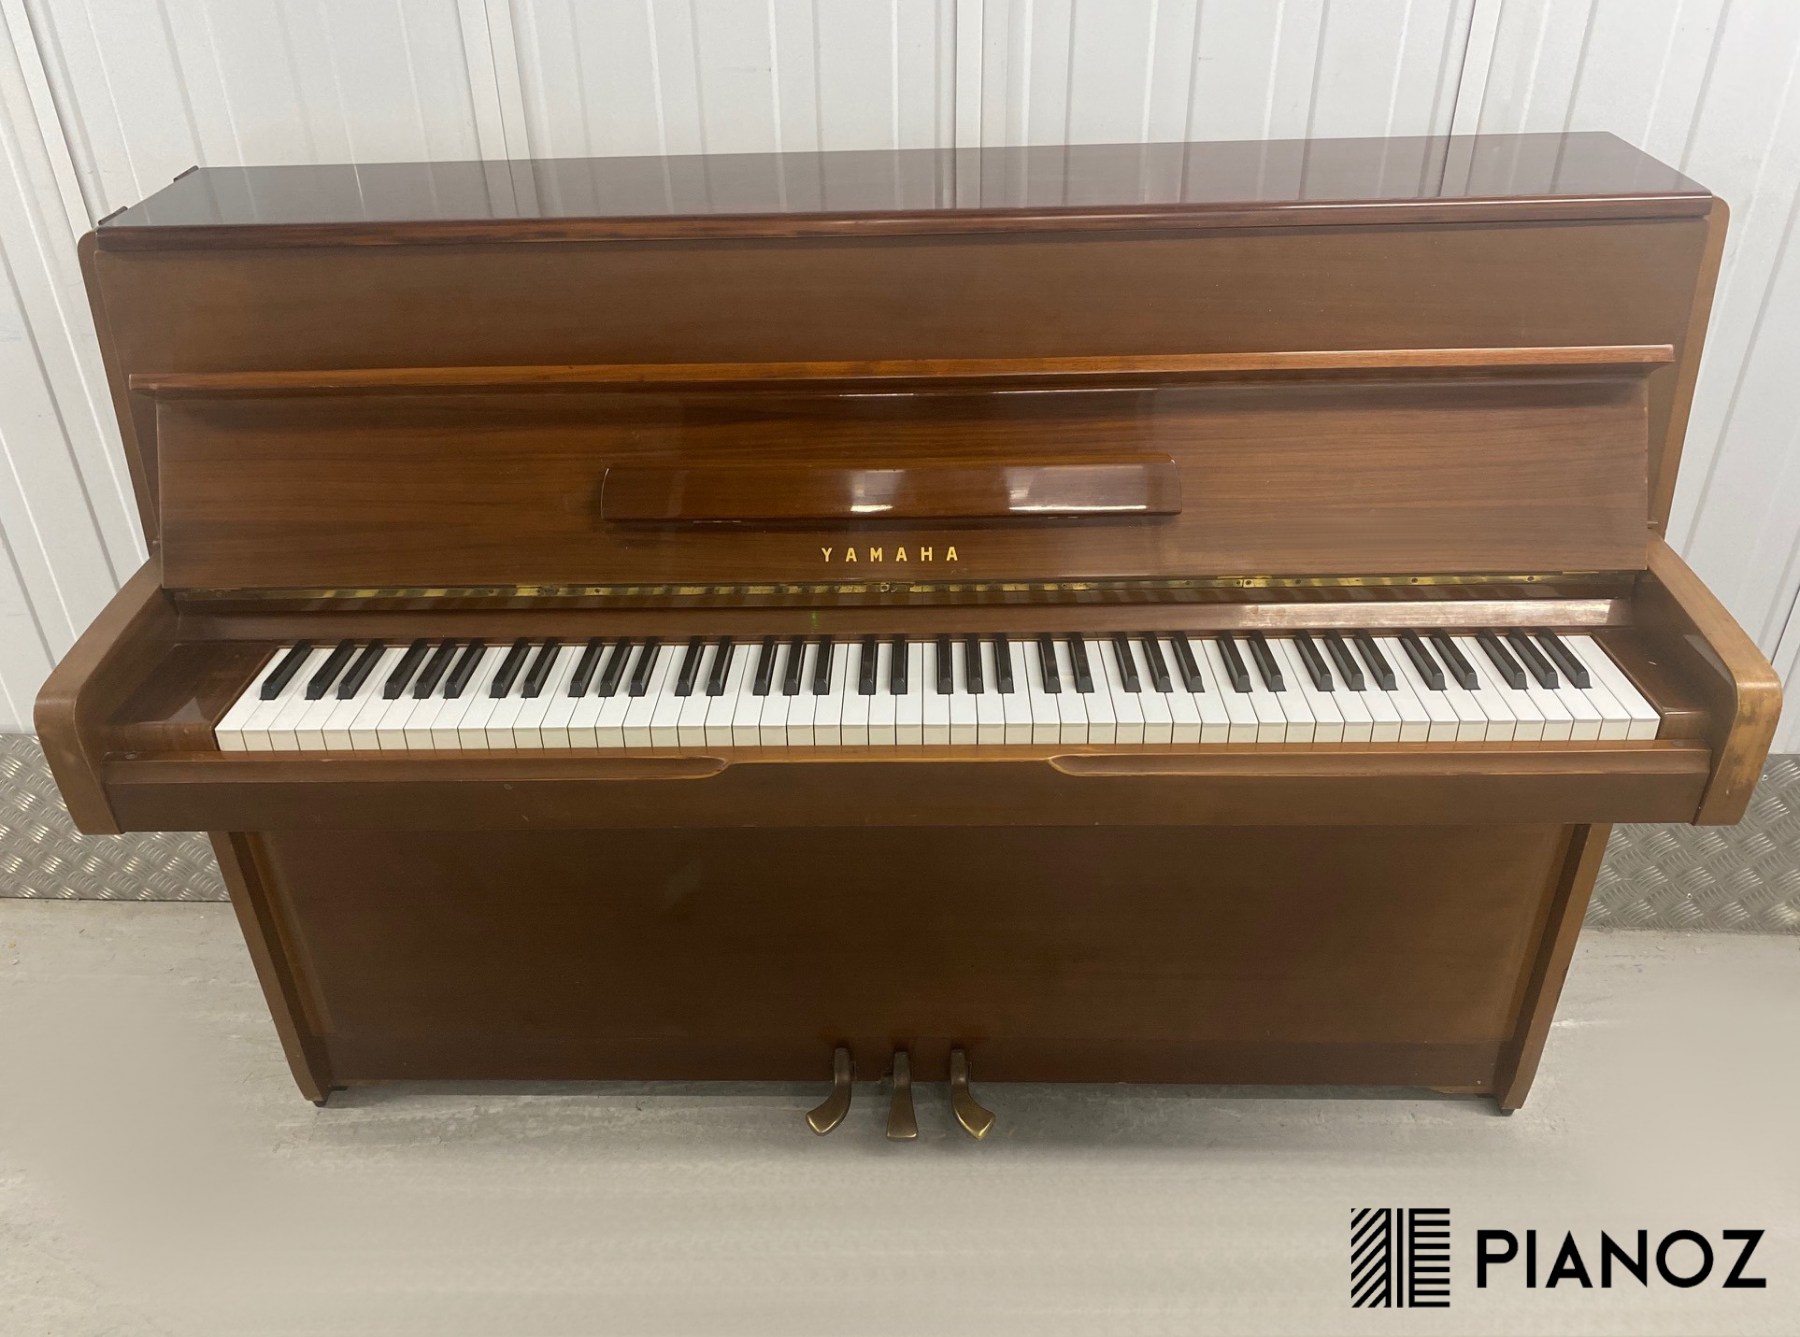 Yamaha M1 Upright Piano piano for sale in UK